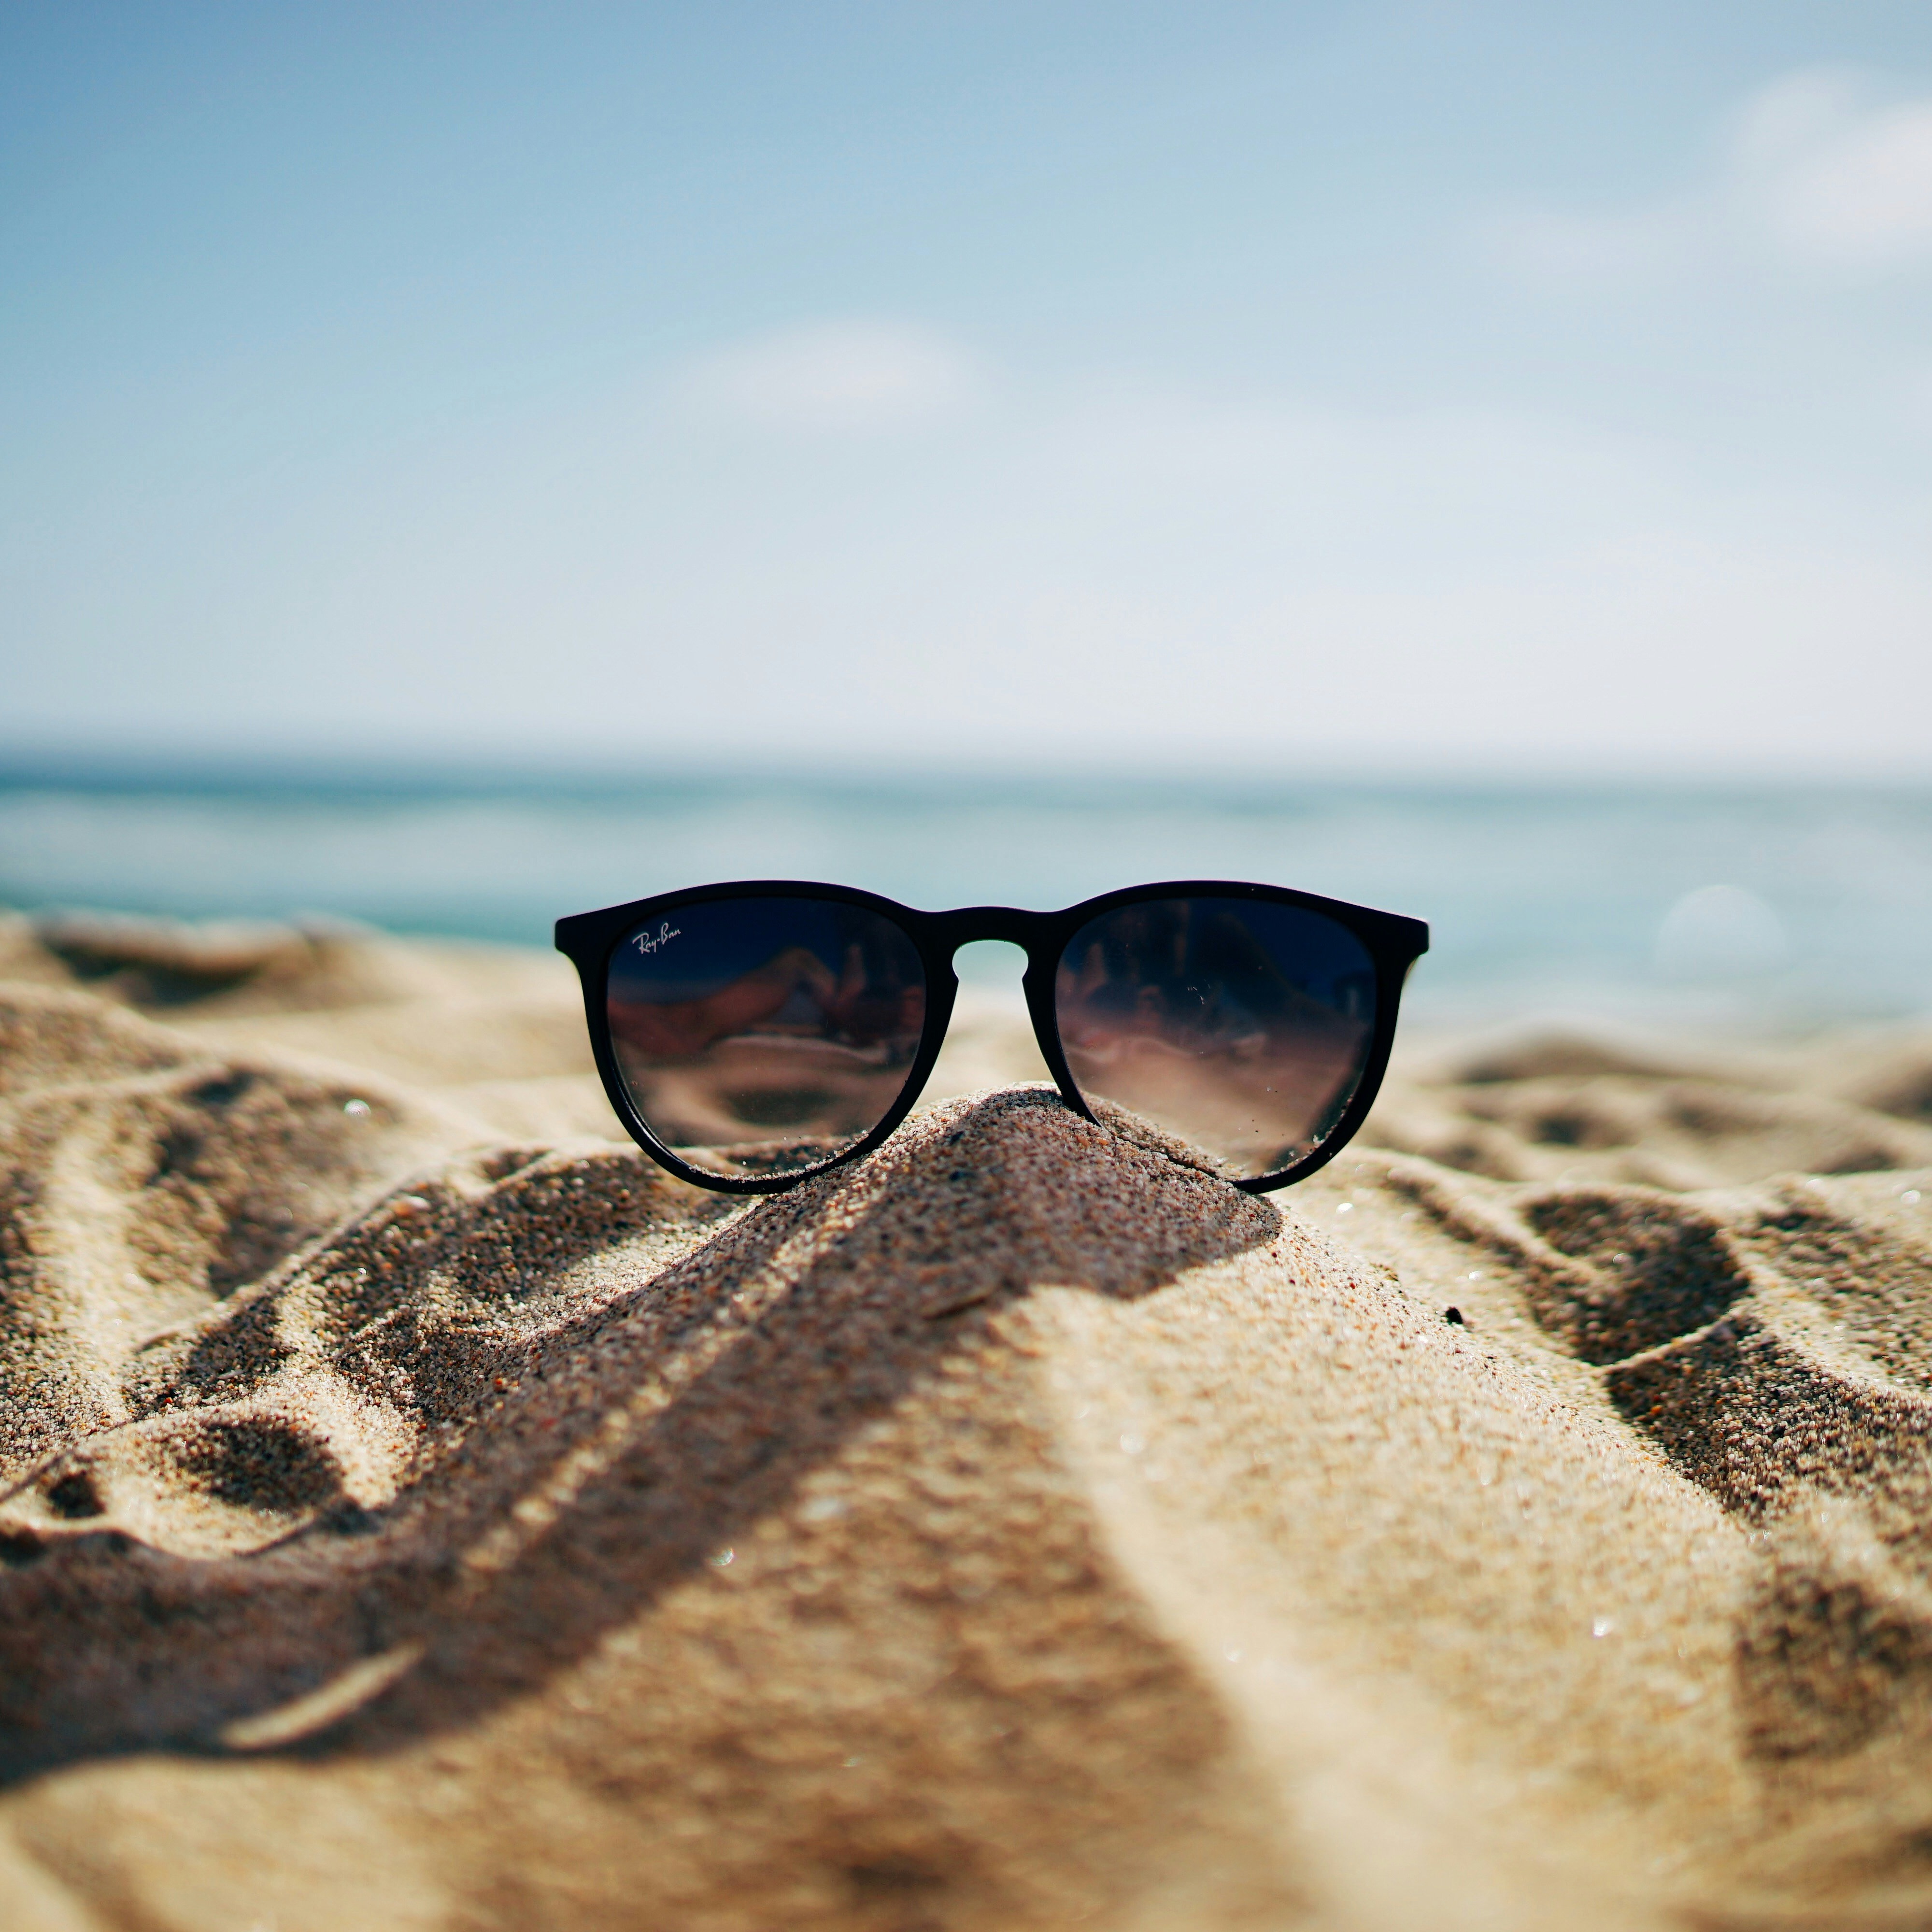 Sunglasses in the sand on a stress-free holiday